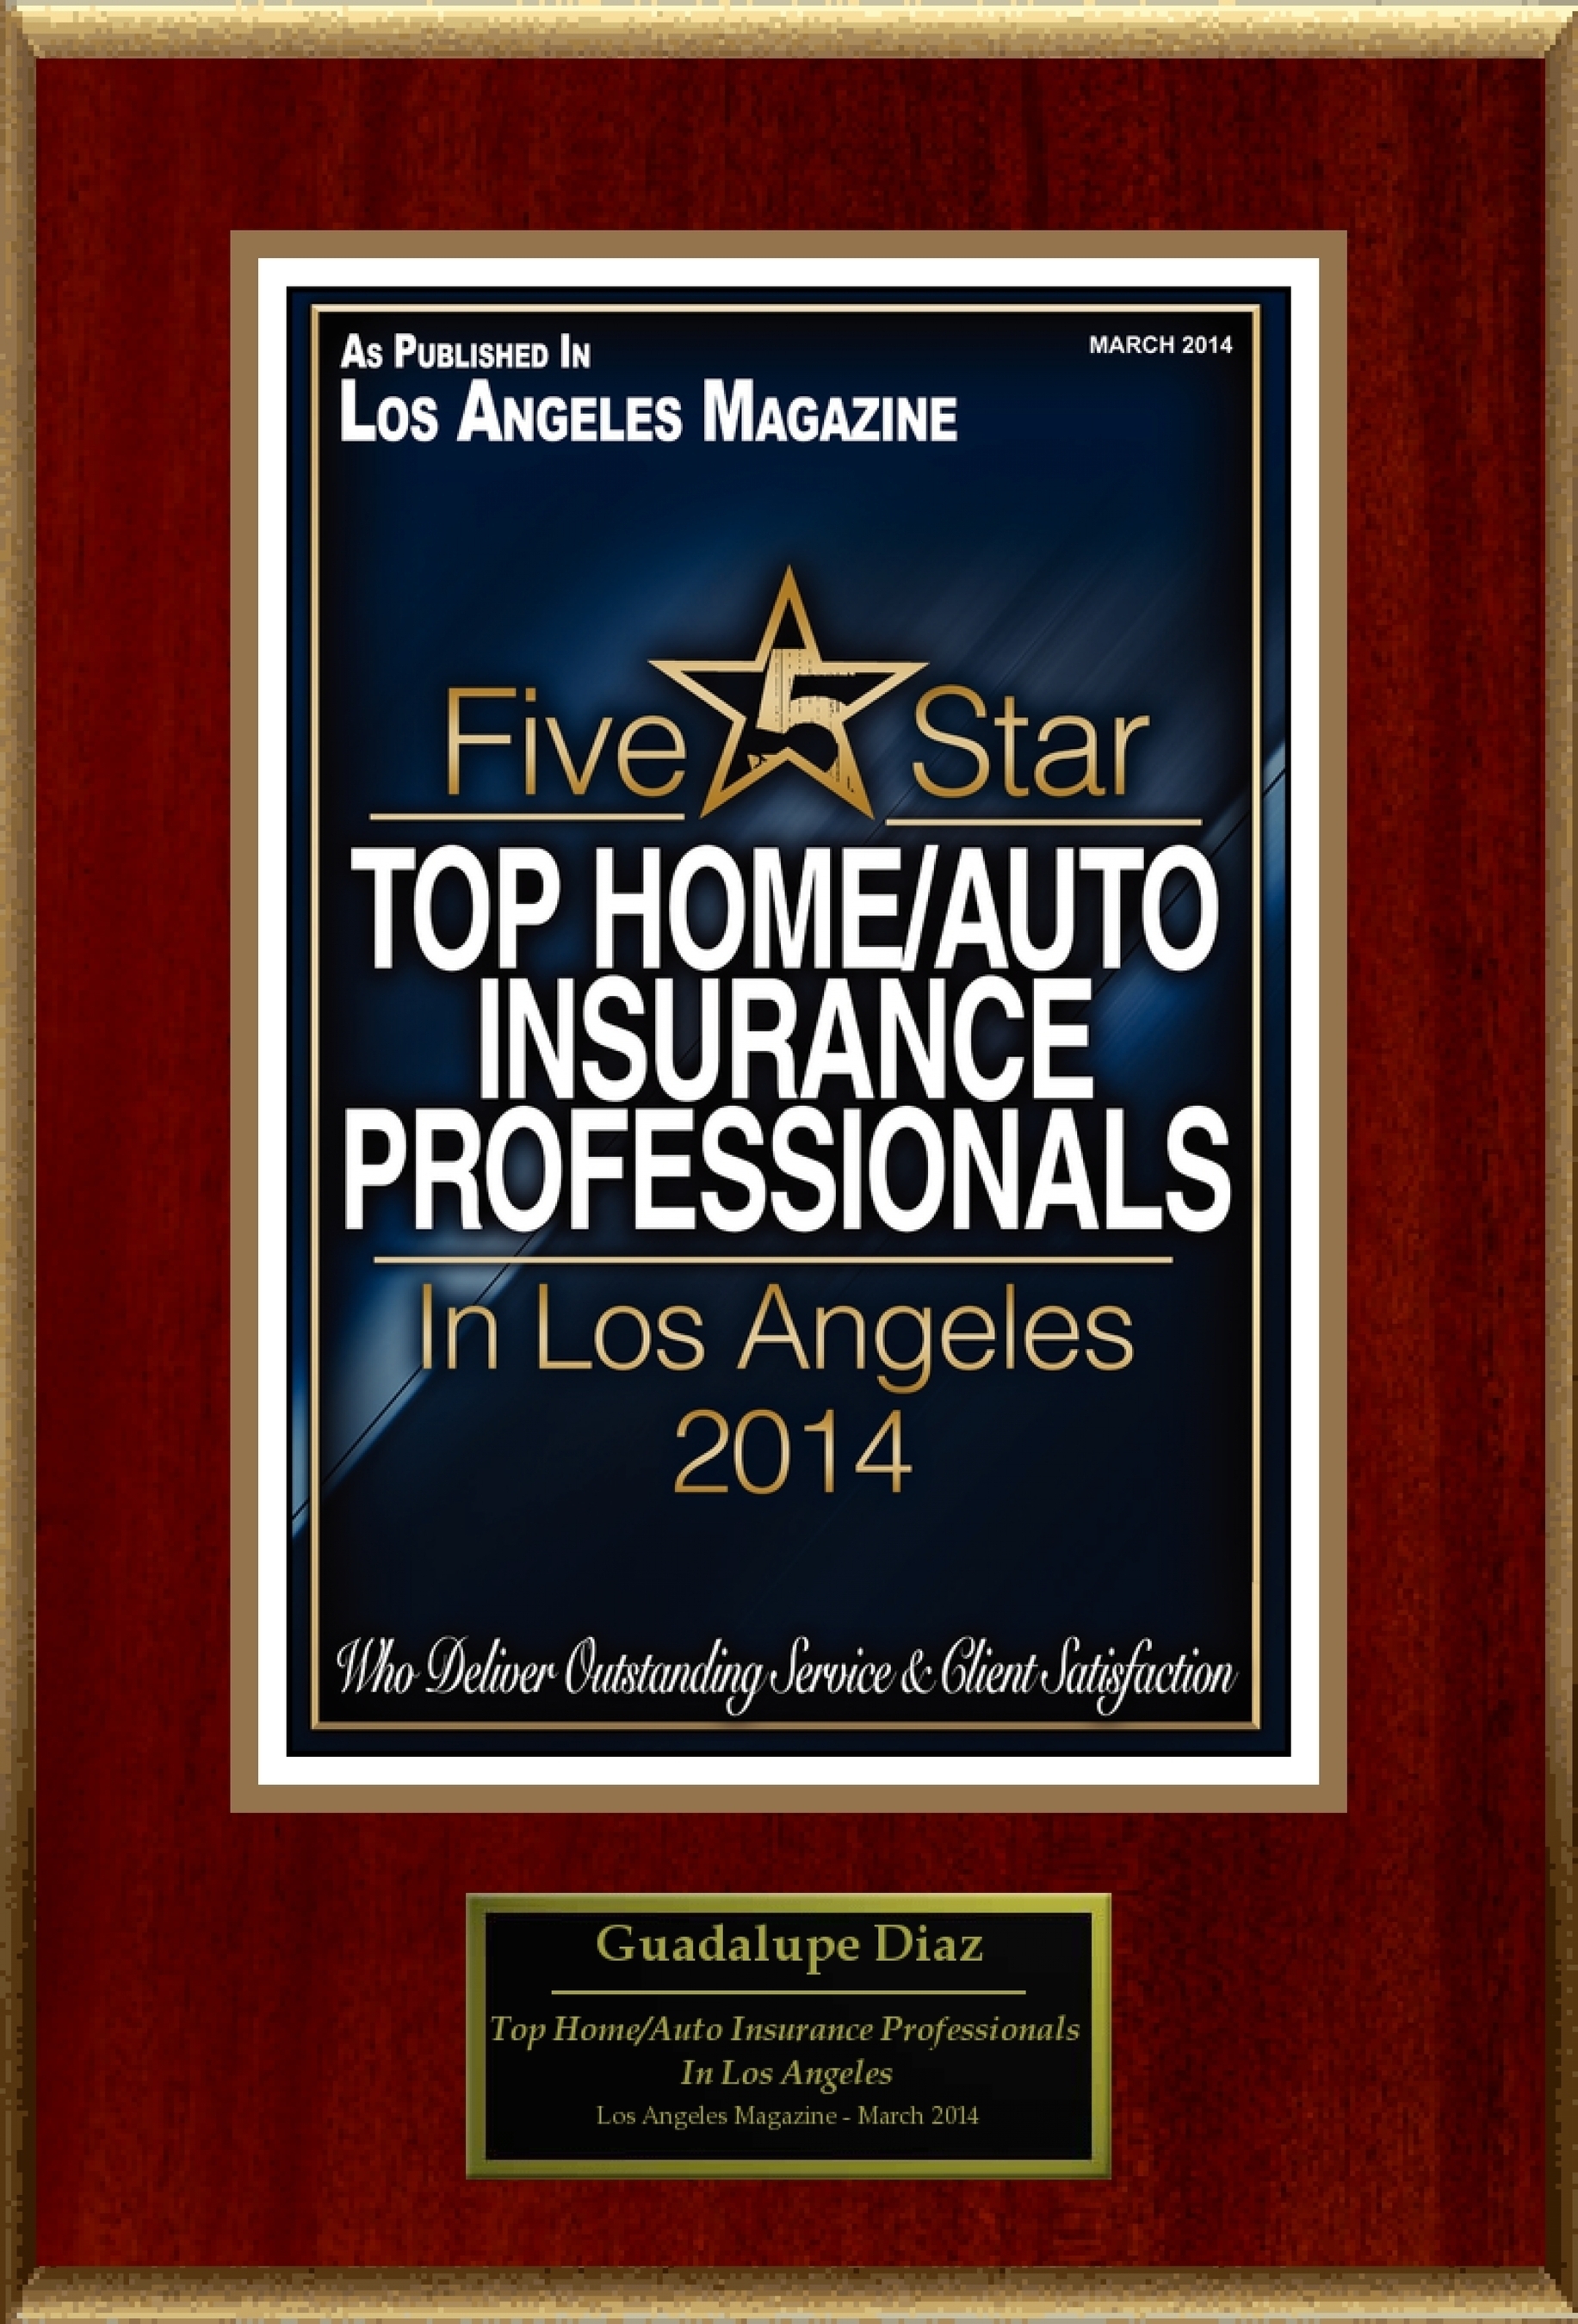 Guadalupe Diaz Selected For "Top Home/Auto Insurance Professionals In Los Angeles" (PRNewsFoto/American Registry )